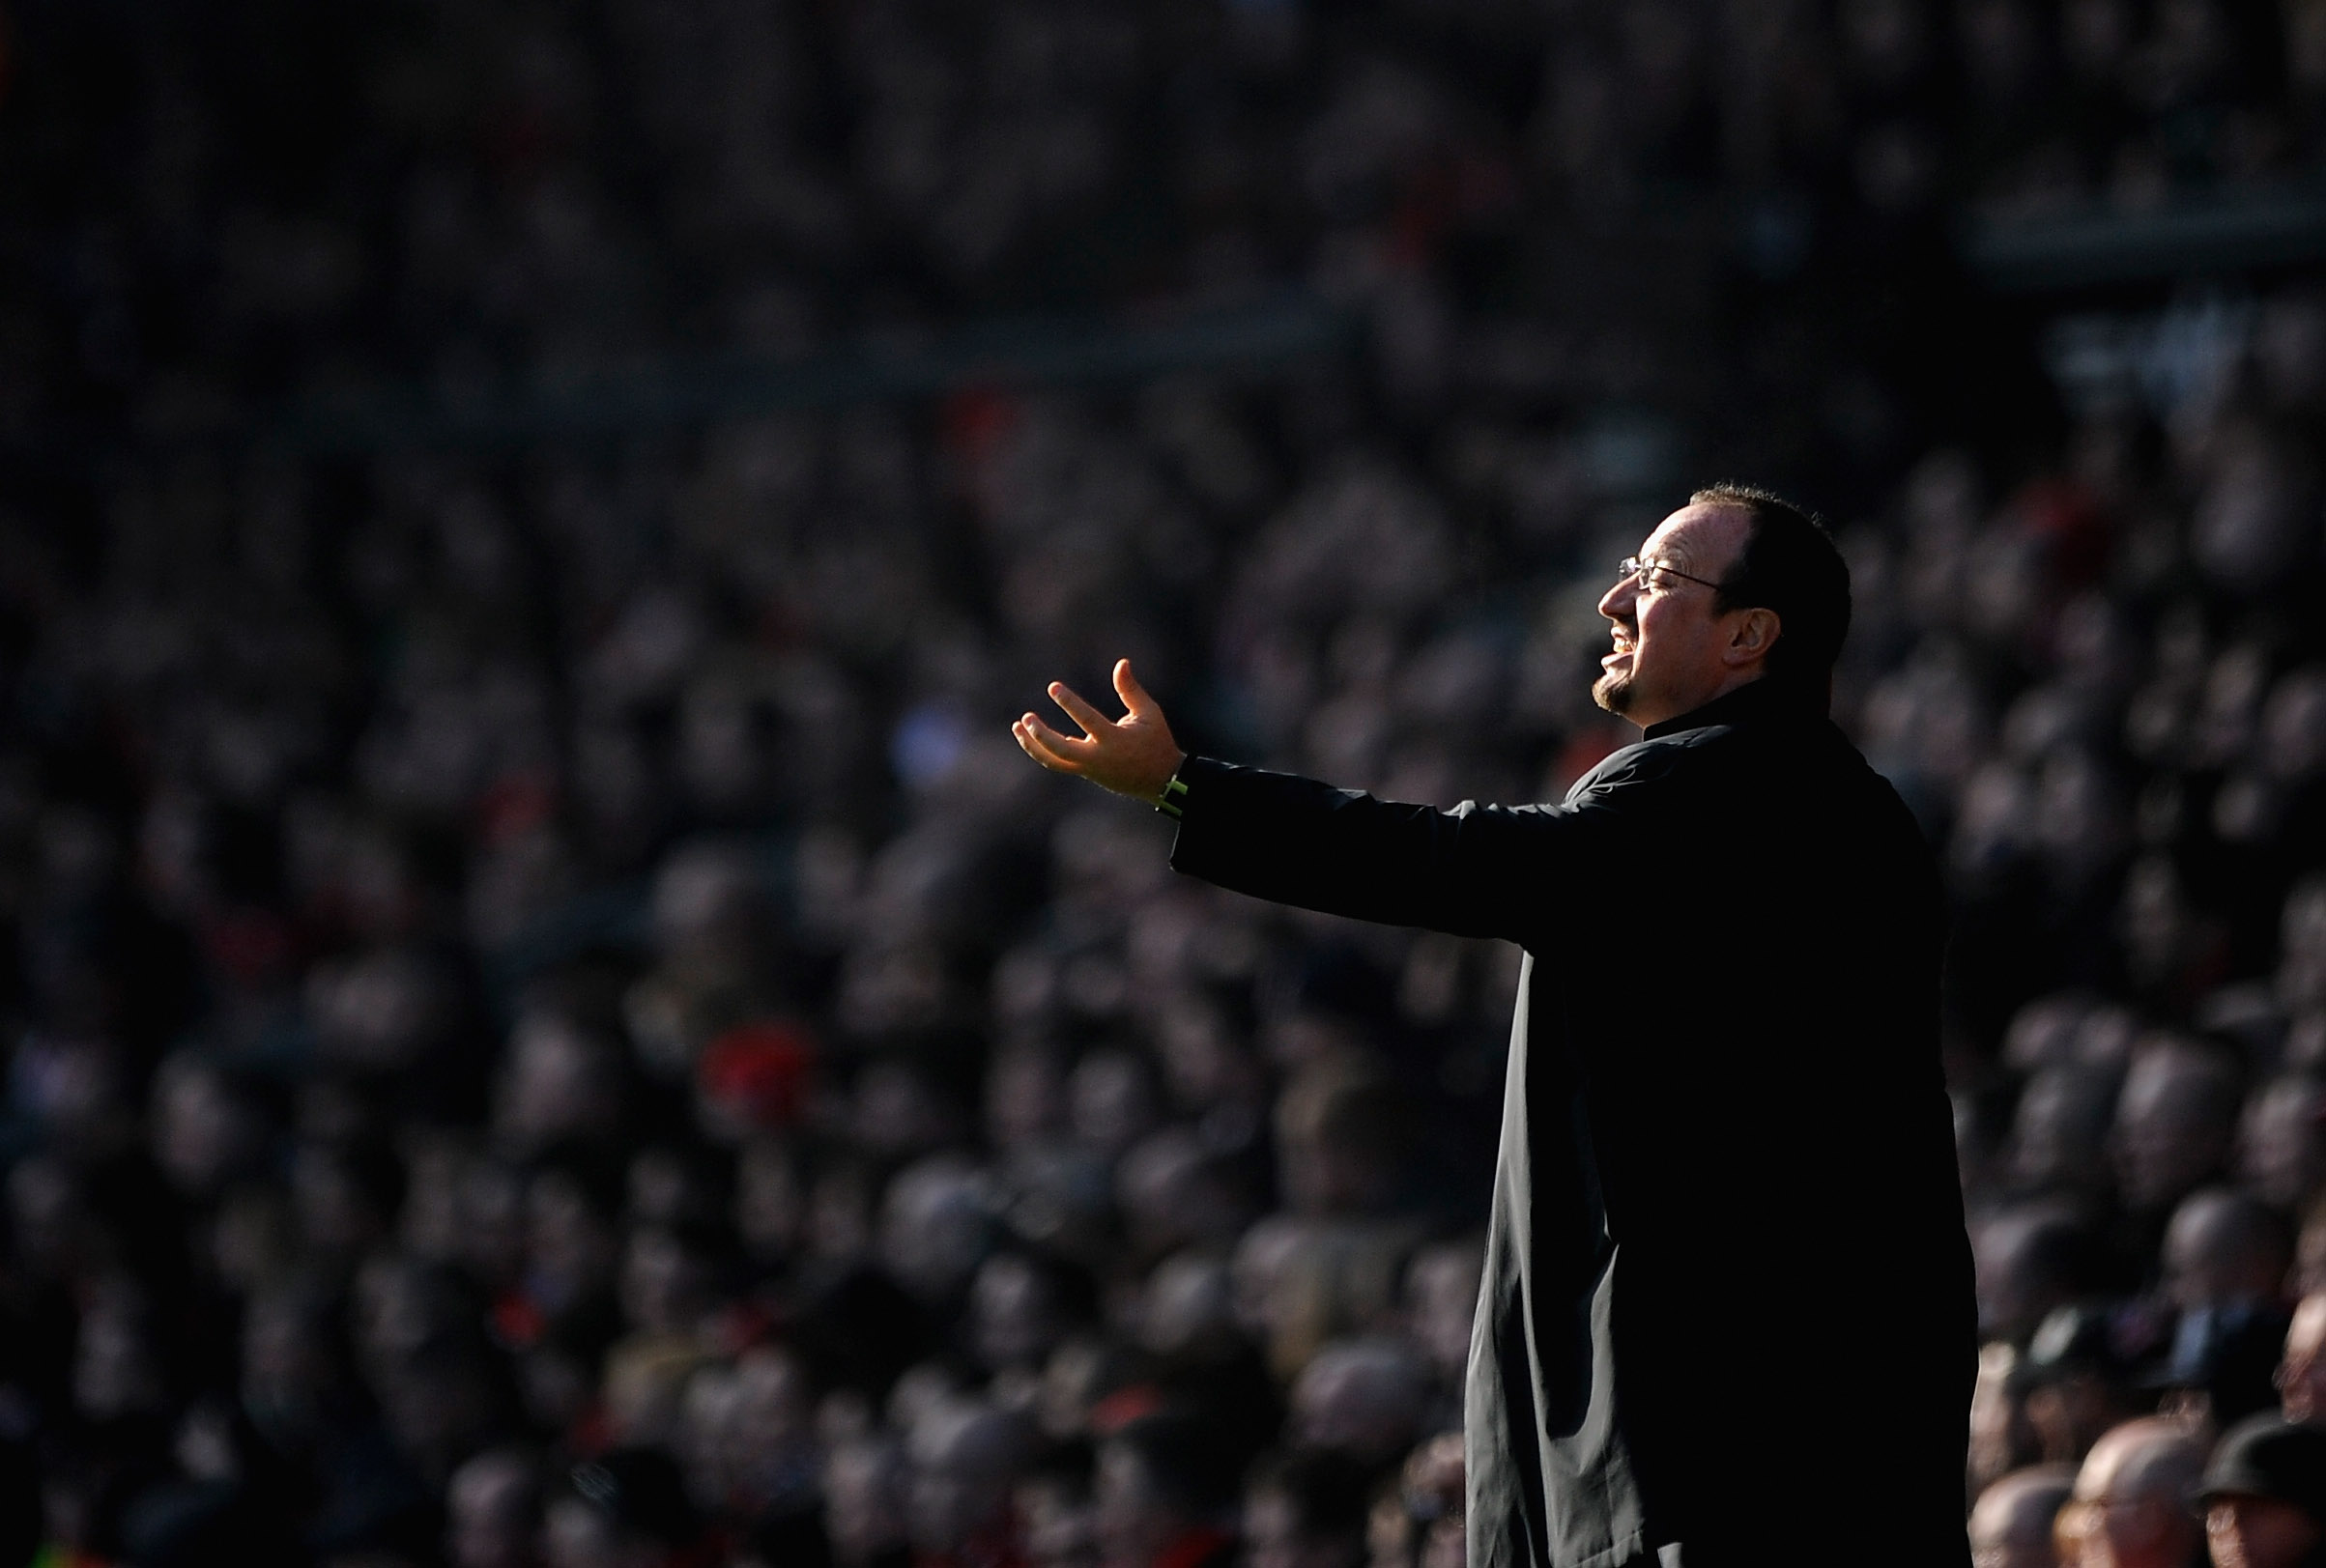 LIVERPOOL, ENGLAND - FEBRUARY 06:  Liverpool Manager Rafael Benitez gestures during the Barclays Premier League match between Liverpool and Everton at Anfield on February 6, 2010 in Liverpool, England.  (Photo by Laurence Griffiths/Getty Images)